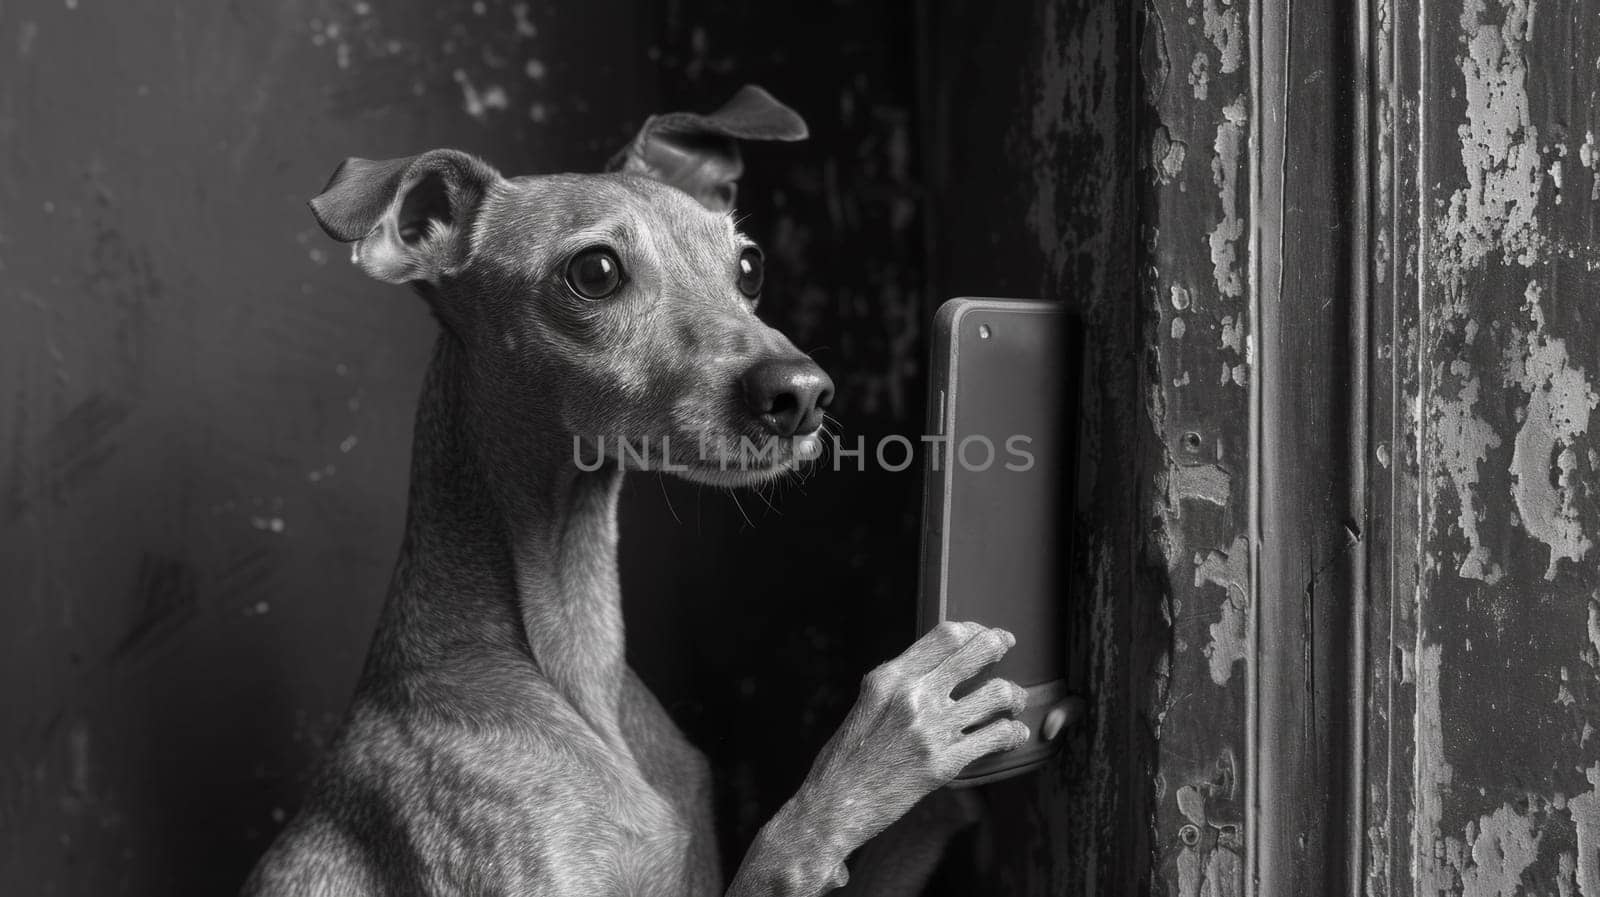 A dog holding a cell phone up to the wall